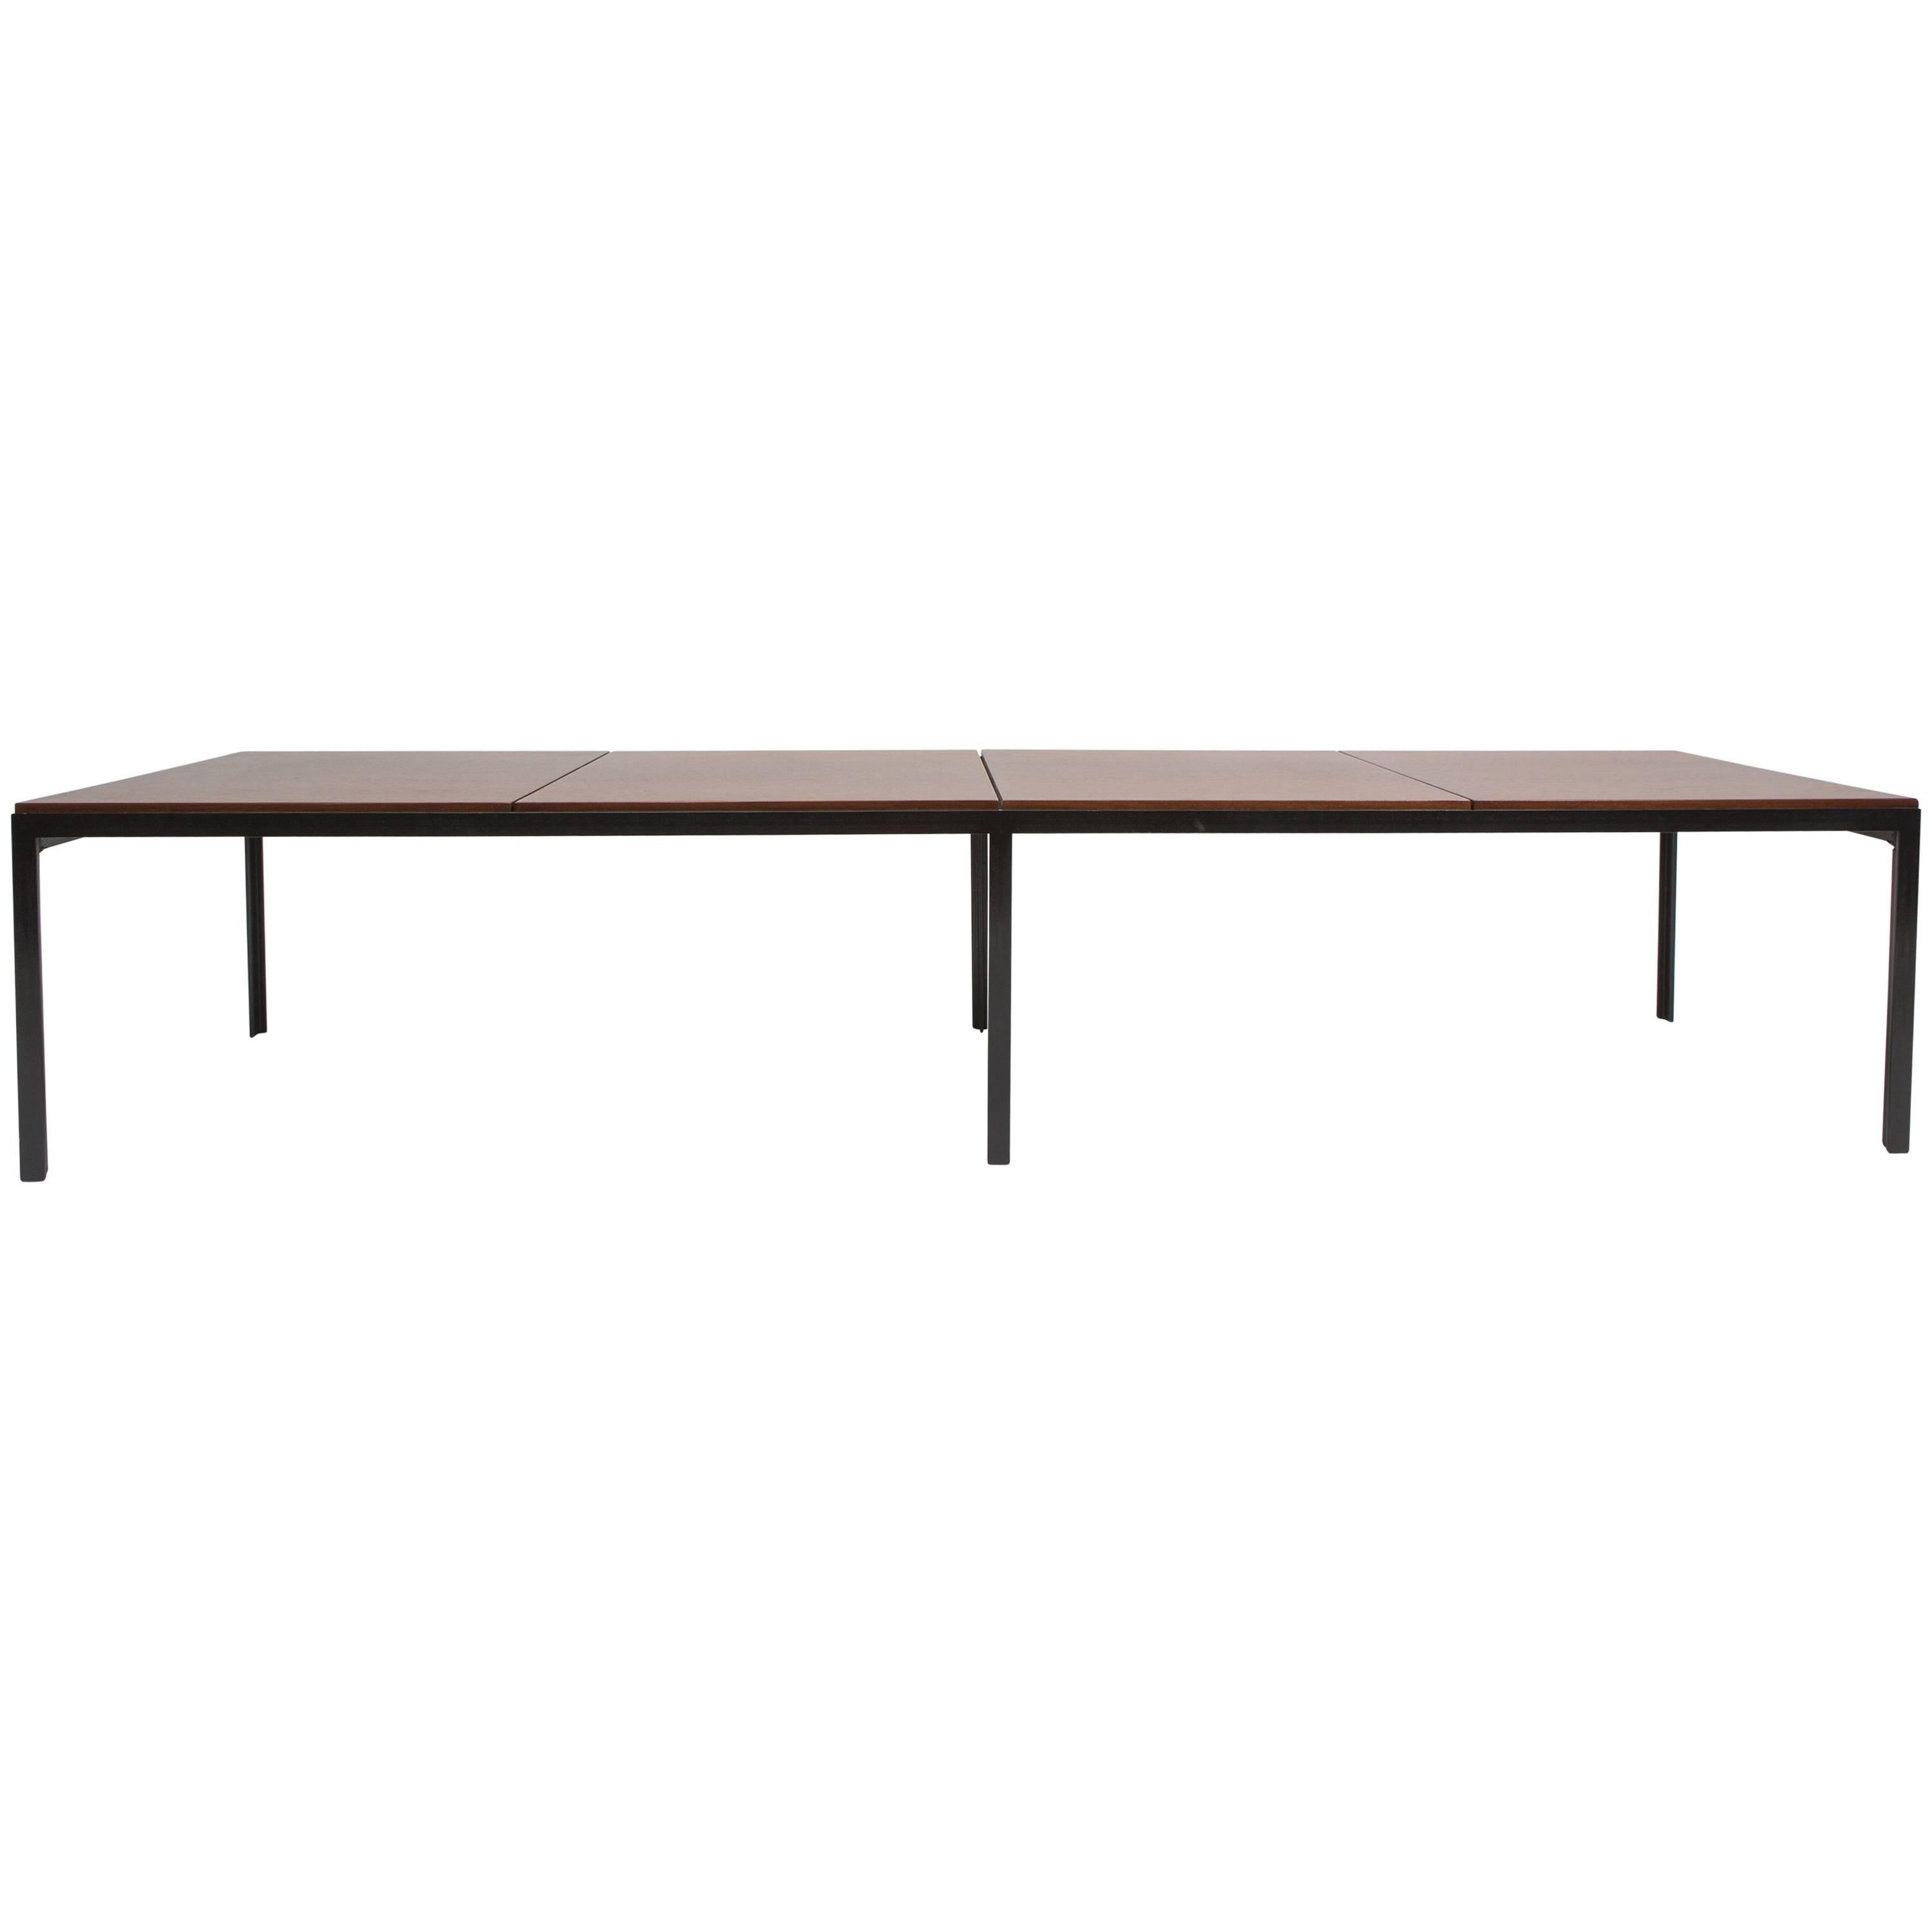 Florence Knoll Walnut and Angle Steel Coffee Table or Bench, 1950s